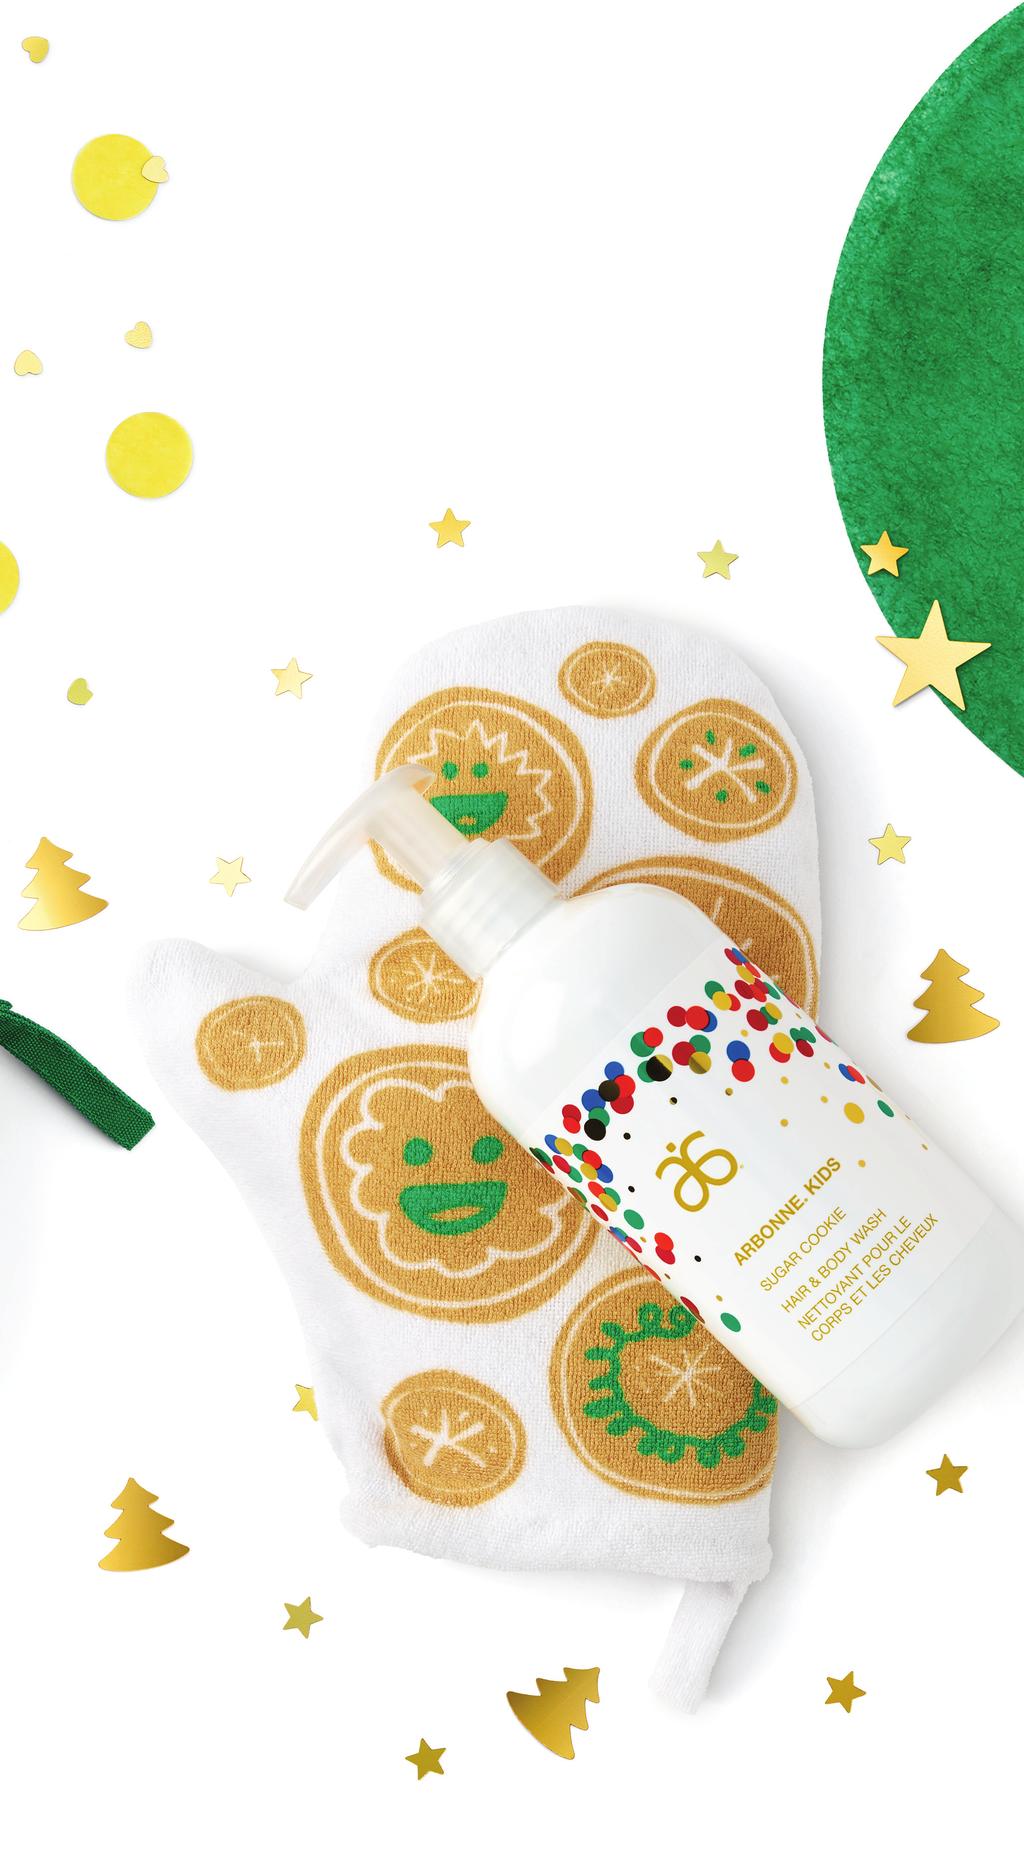 Arbonne Kids Sugar Cookie Bath Time Gift Set This double duty Hair & Body Wash features notes of toasted sugar, nutmeg and caramel to make bath time smell like a batch of freshly baked sugar cookies.